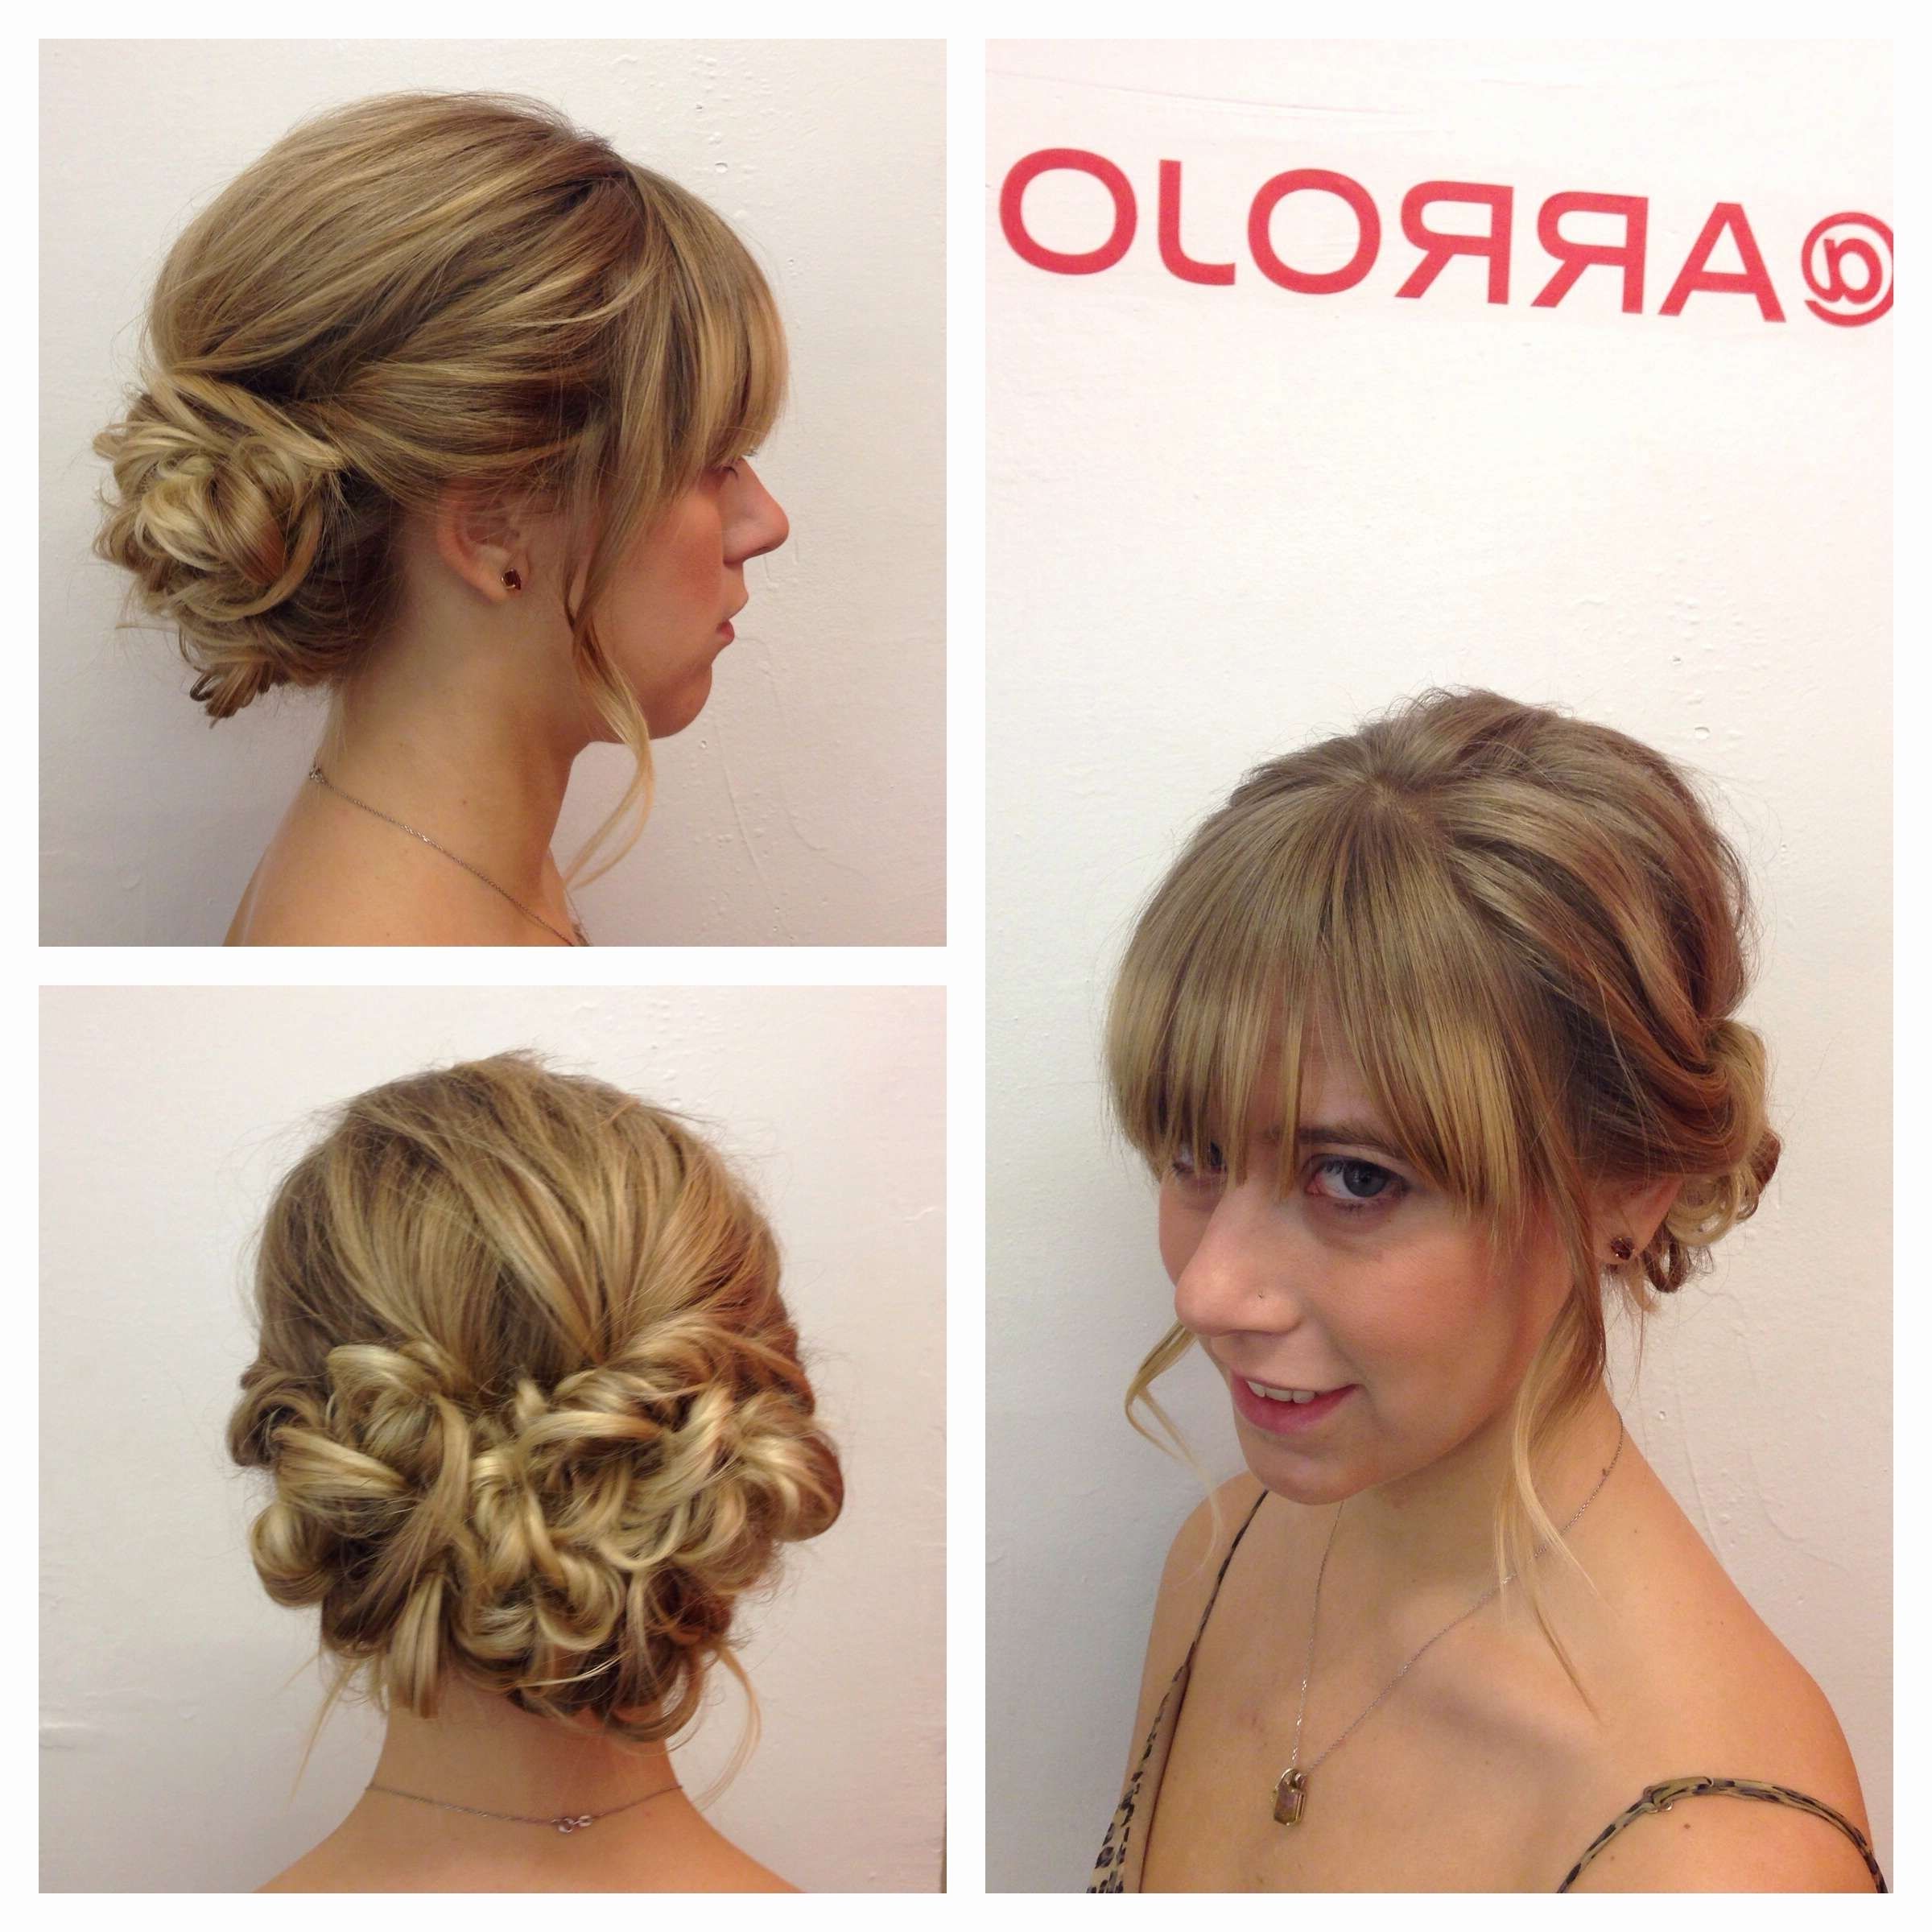 18 New Wedding Hairstyles That Last All Day Pictures (View 13 of 15)